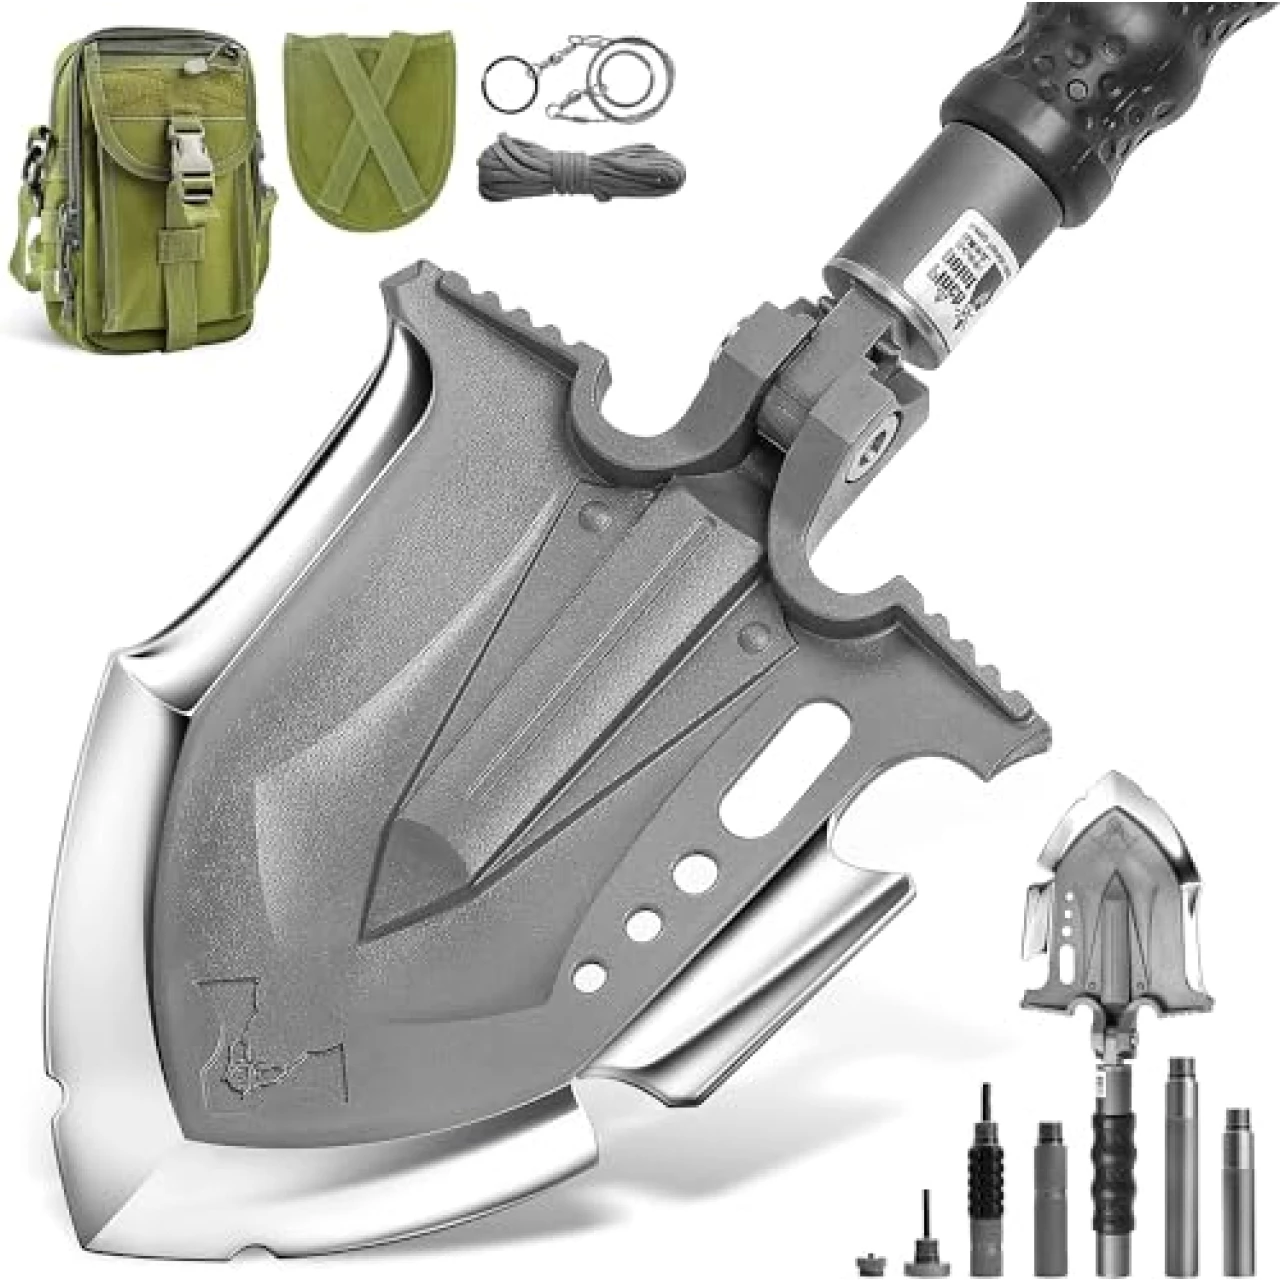 GRAMFIRE Survival Tactical Shovel Multitool 28 in 1 Luxury Kit, Folding Shovel with Military Grade Martensitic Steel Adjustable 7 Angles Spade, 24.5”-35.5” Emergency Entrenching Tool with Bag, F-A3